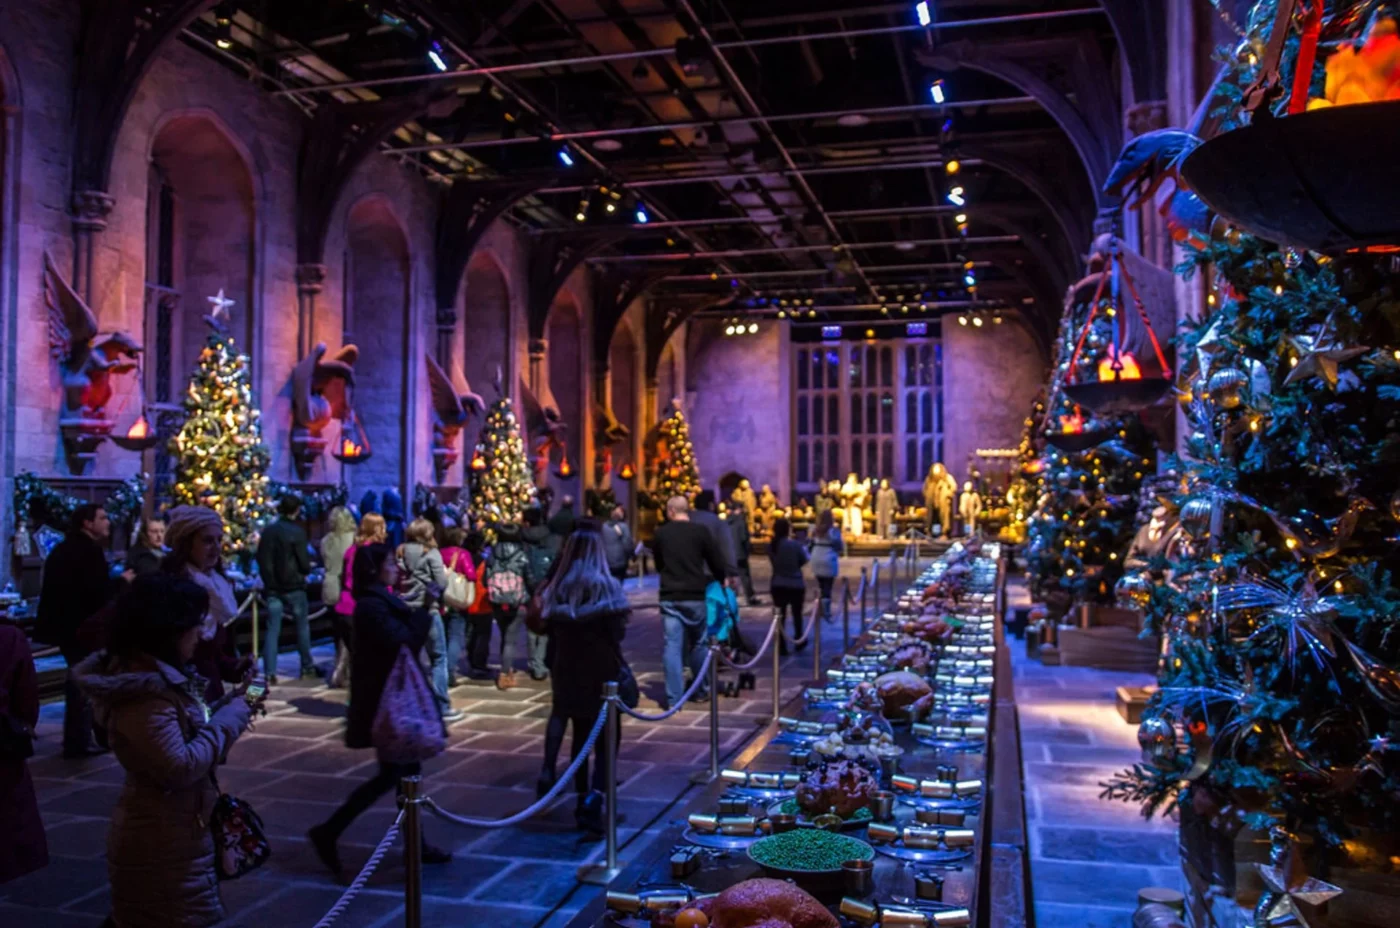 The Great Hall from Harry Potter decorated for Christmas